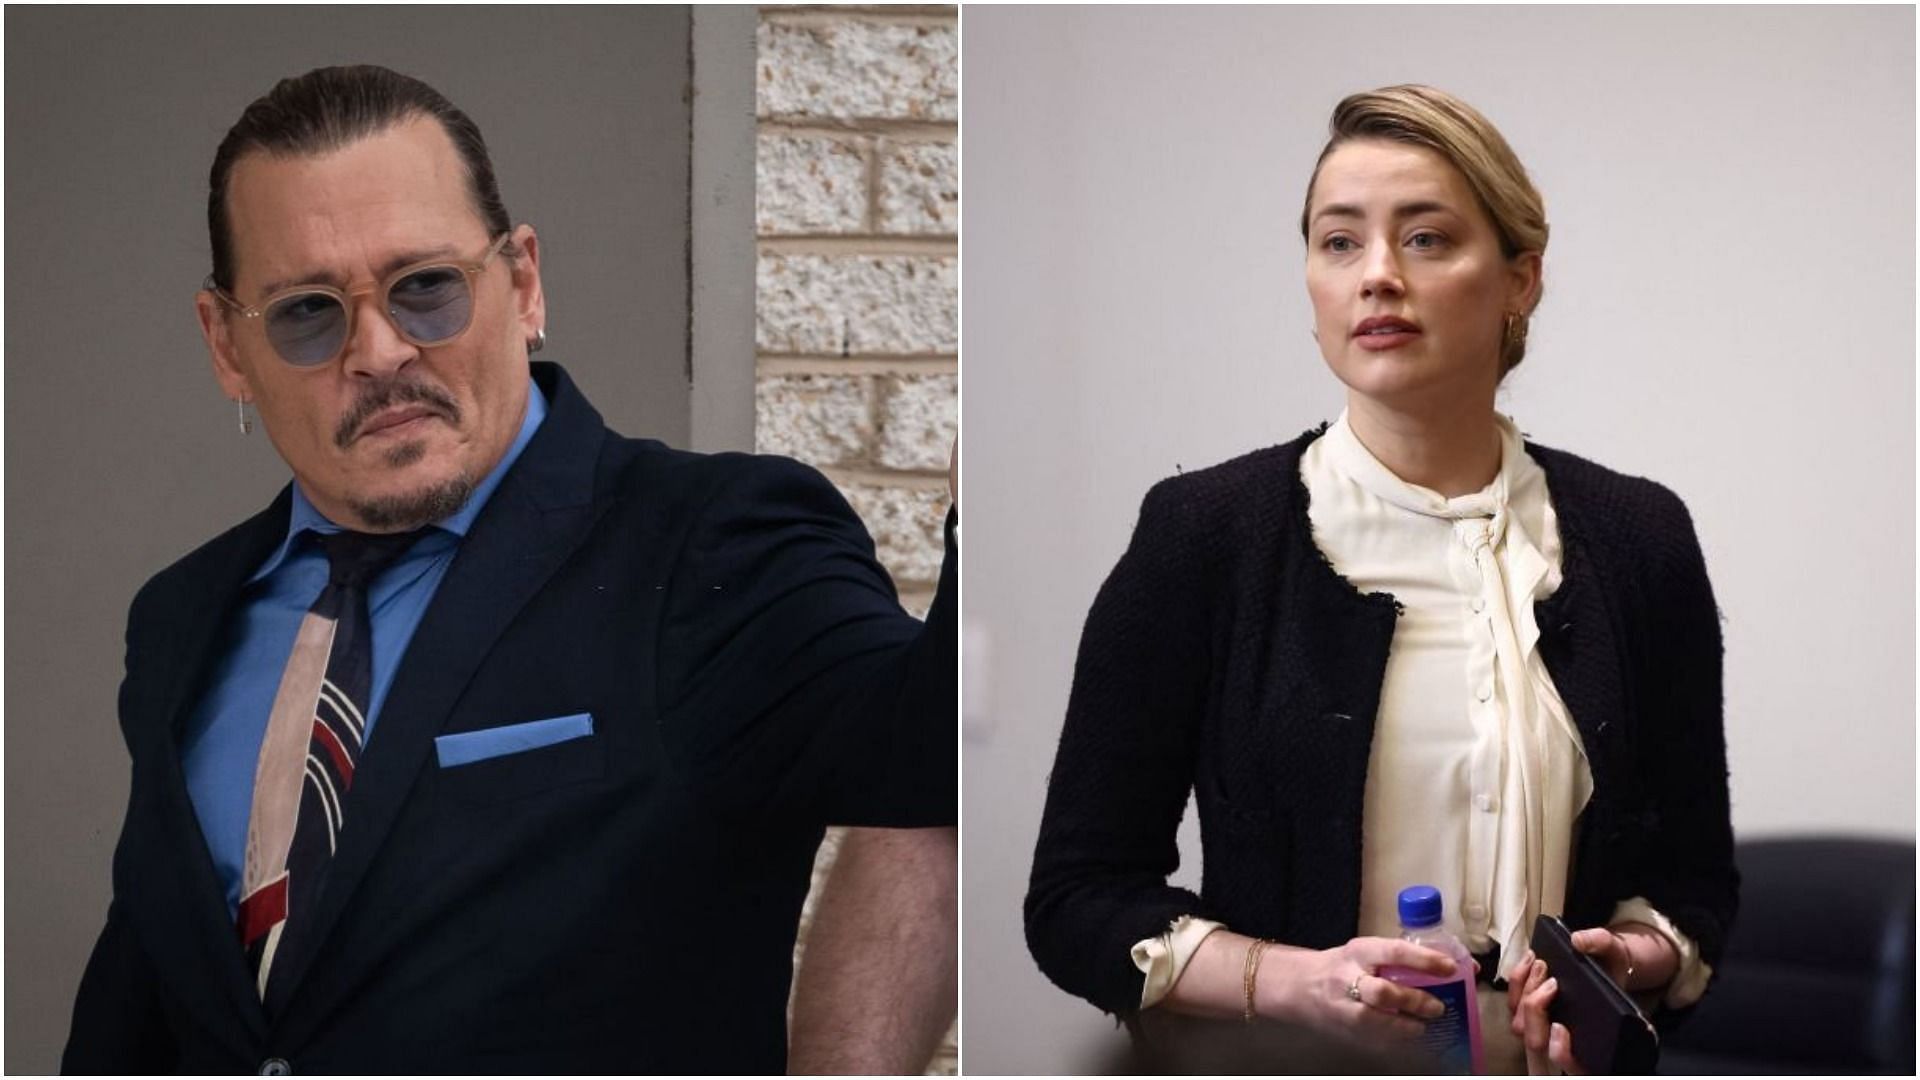 SNL&#039;s latest episode mocked Johnny Depp and Amber Heard&#039;s defamation trial (Images via Cliff Owen and Jim Lo Scalzo/Getty Images)